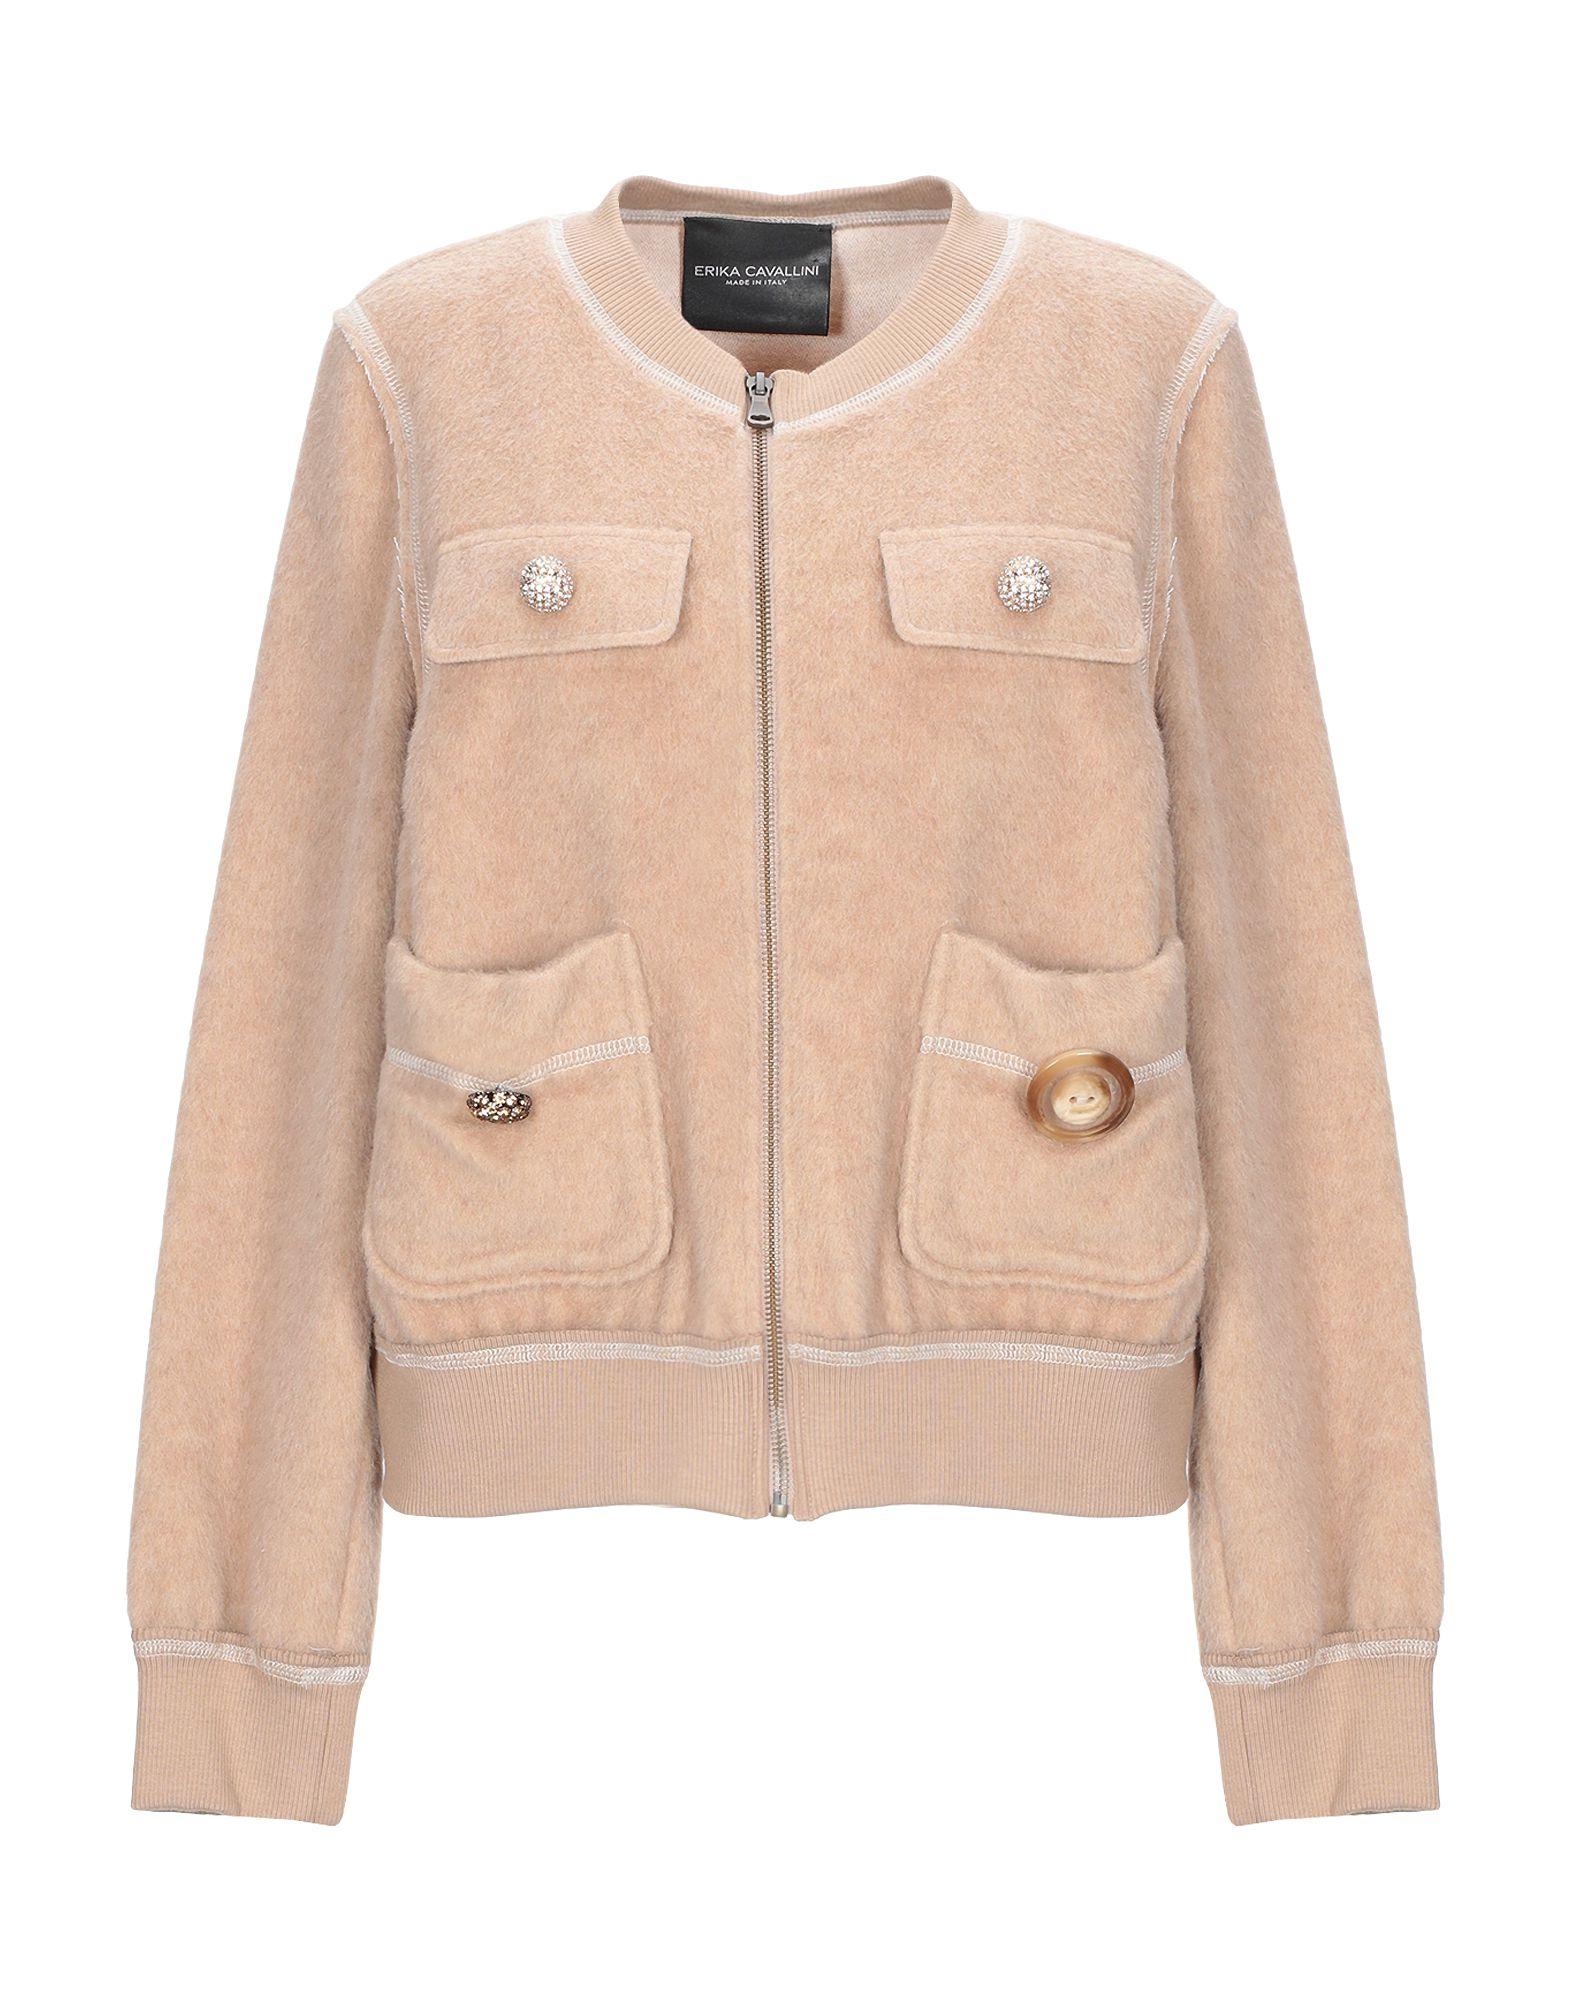 Erika Cavallini Semi Couture Wool Jacket in Camel (Natural) - Lyst